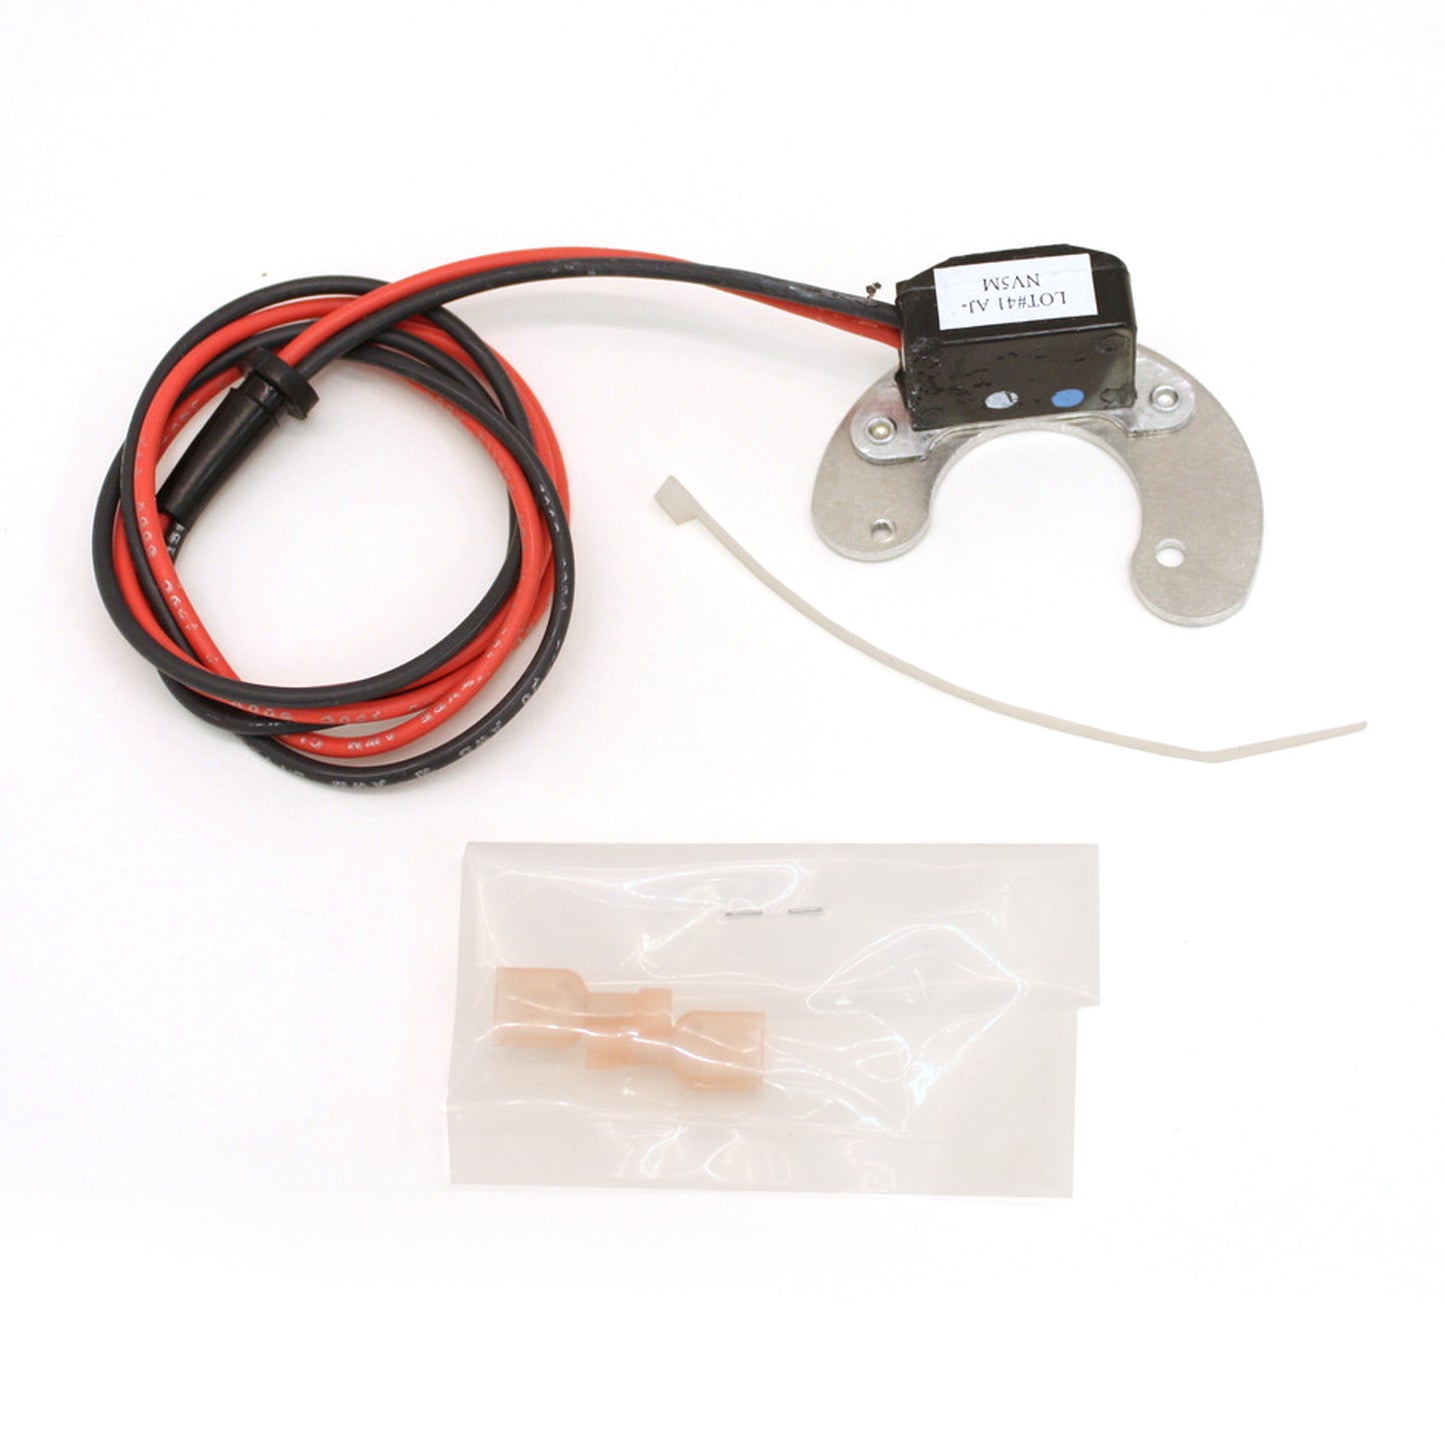 PerTronix D500707 Module (replacement) Ignitor for PerTronix Flame-Thrower British Cast Distributor